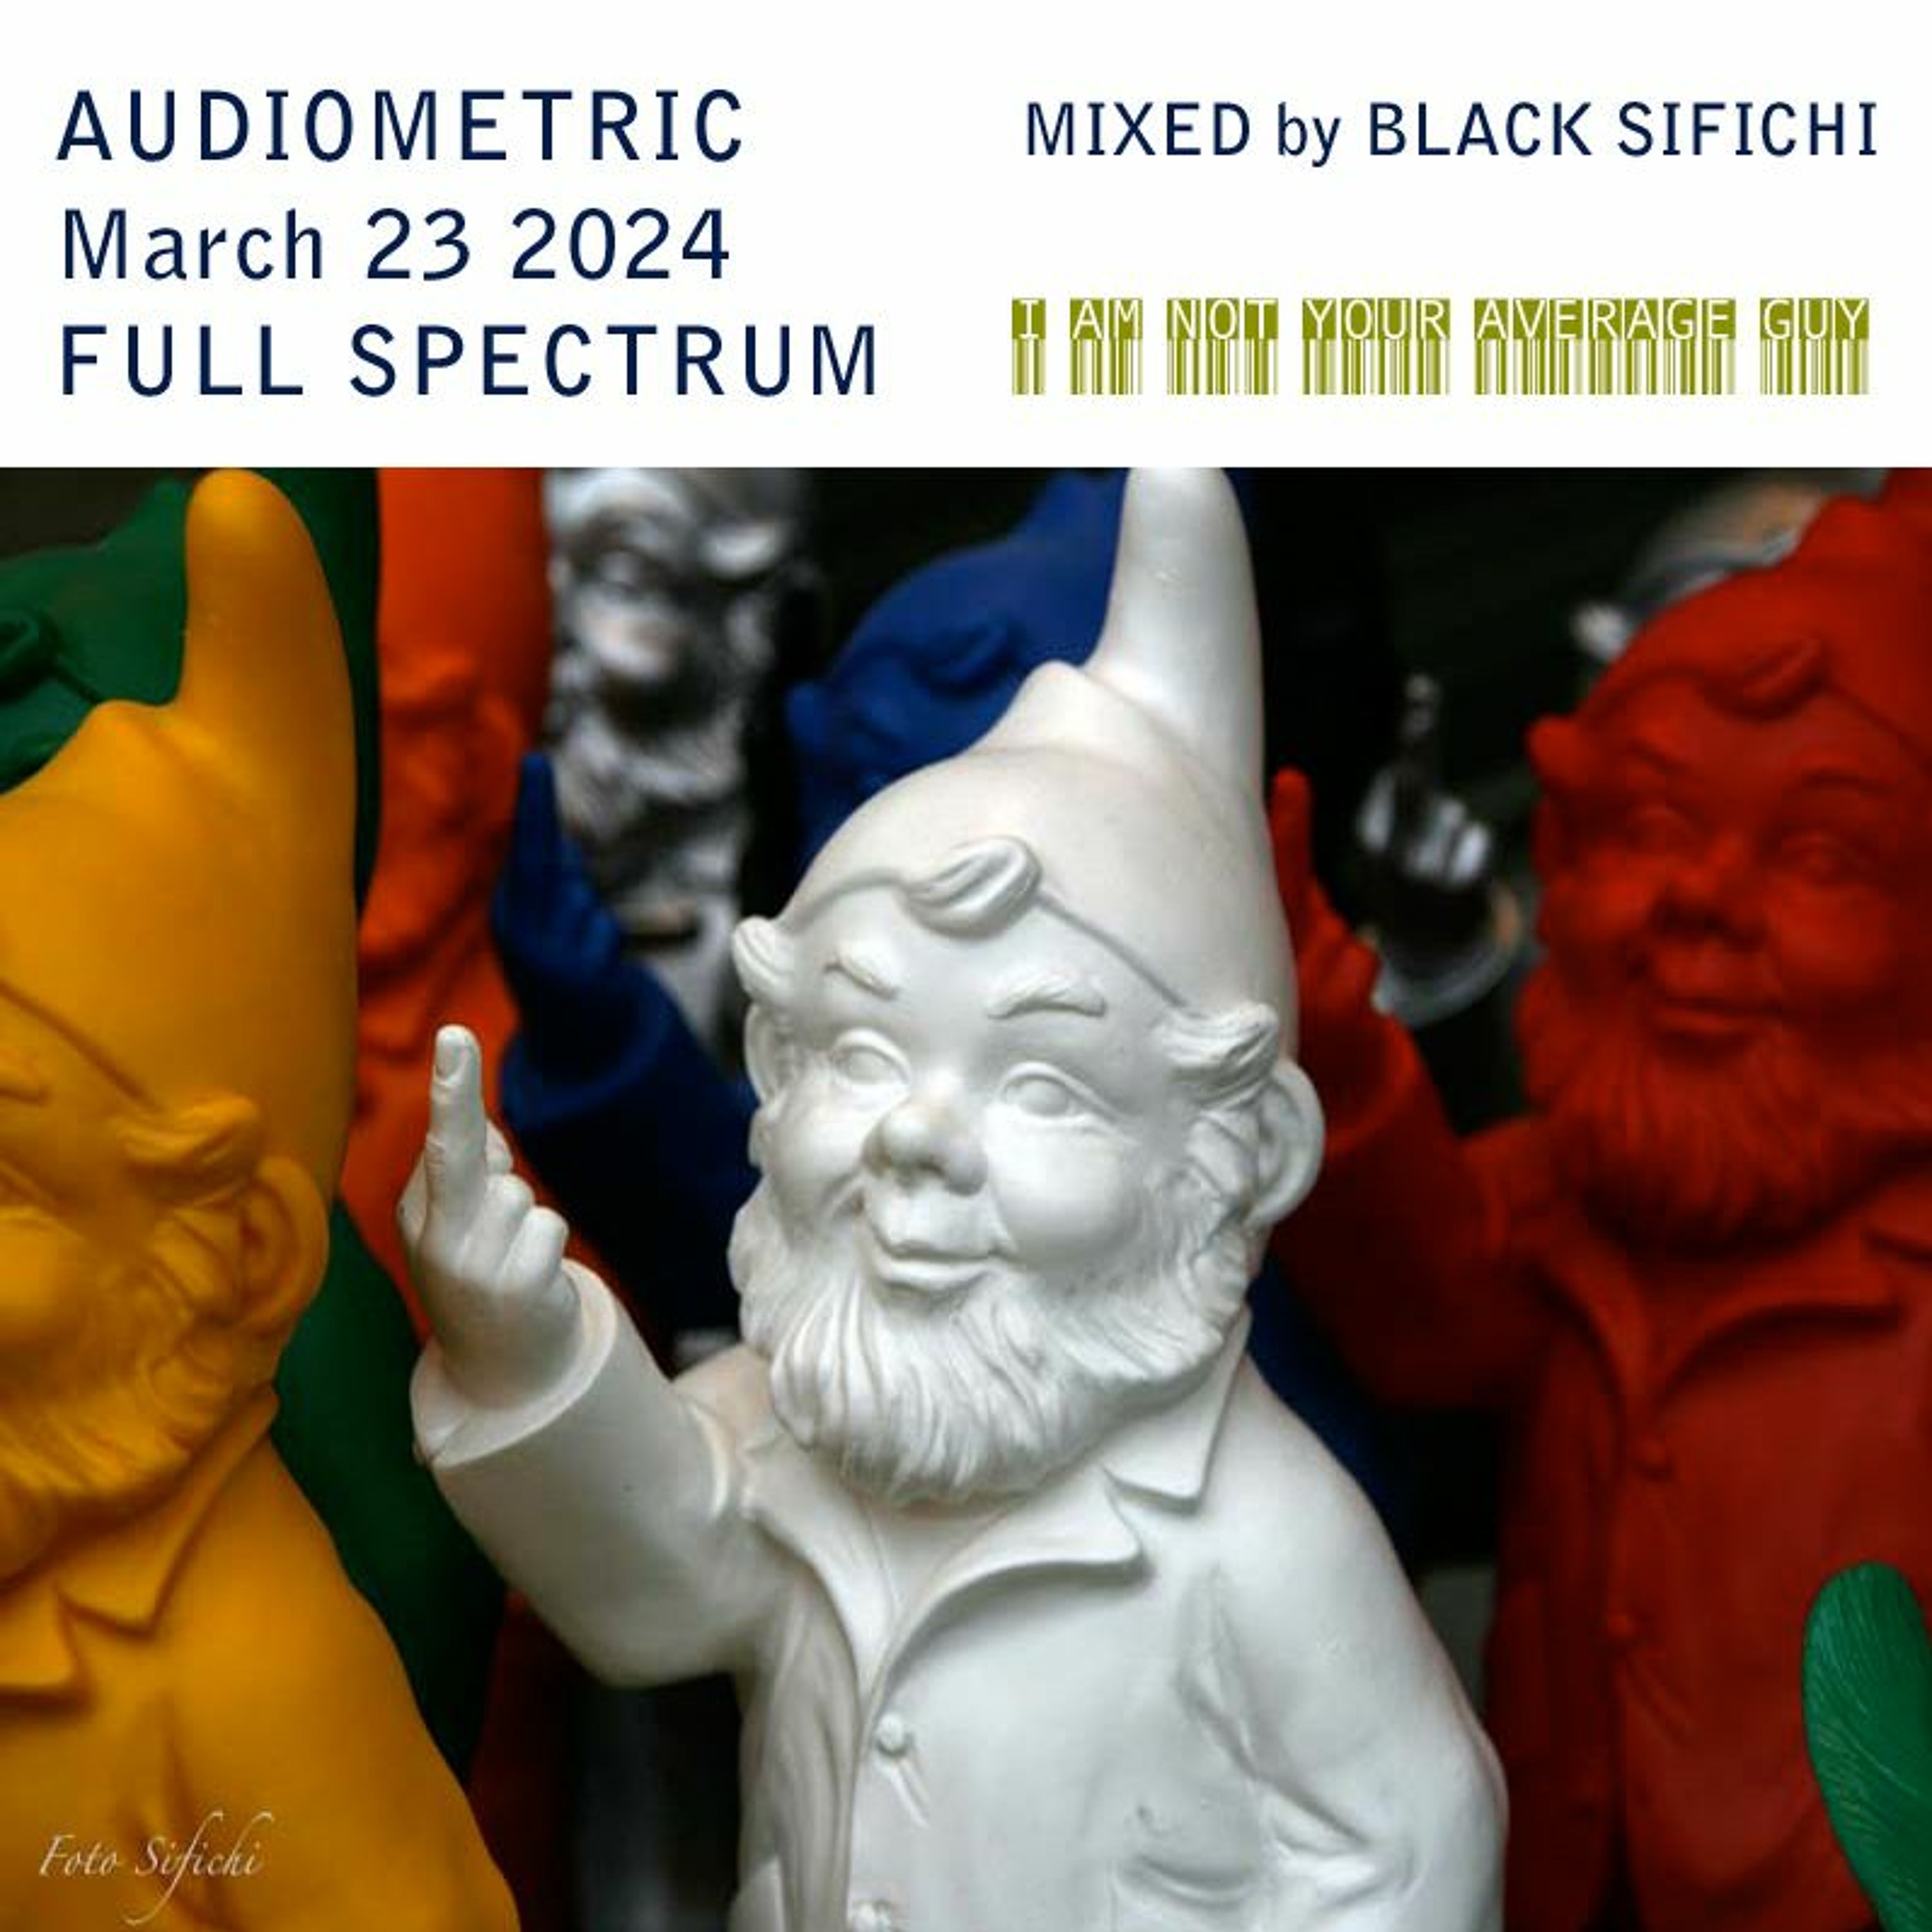 Audiometric March 23 2024 – mixed by Black Sifichi – Full Spectrum